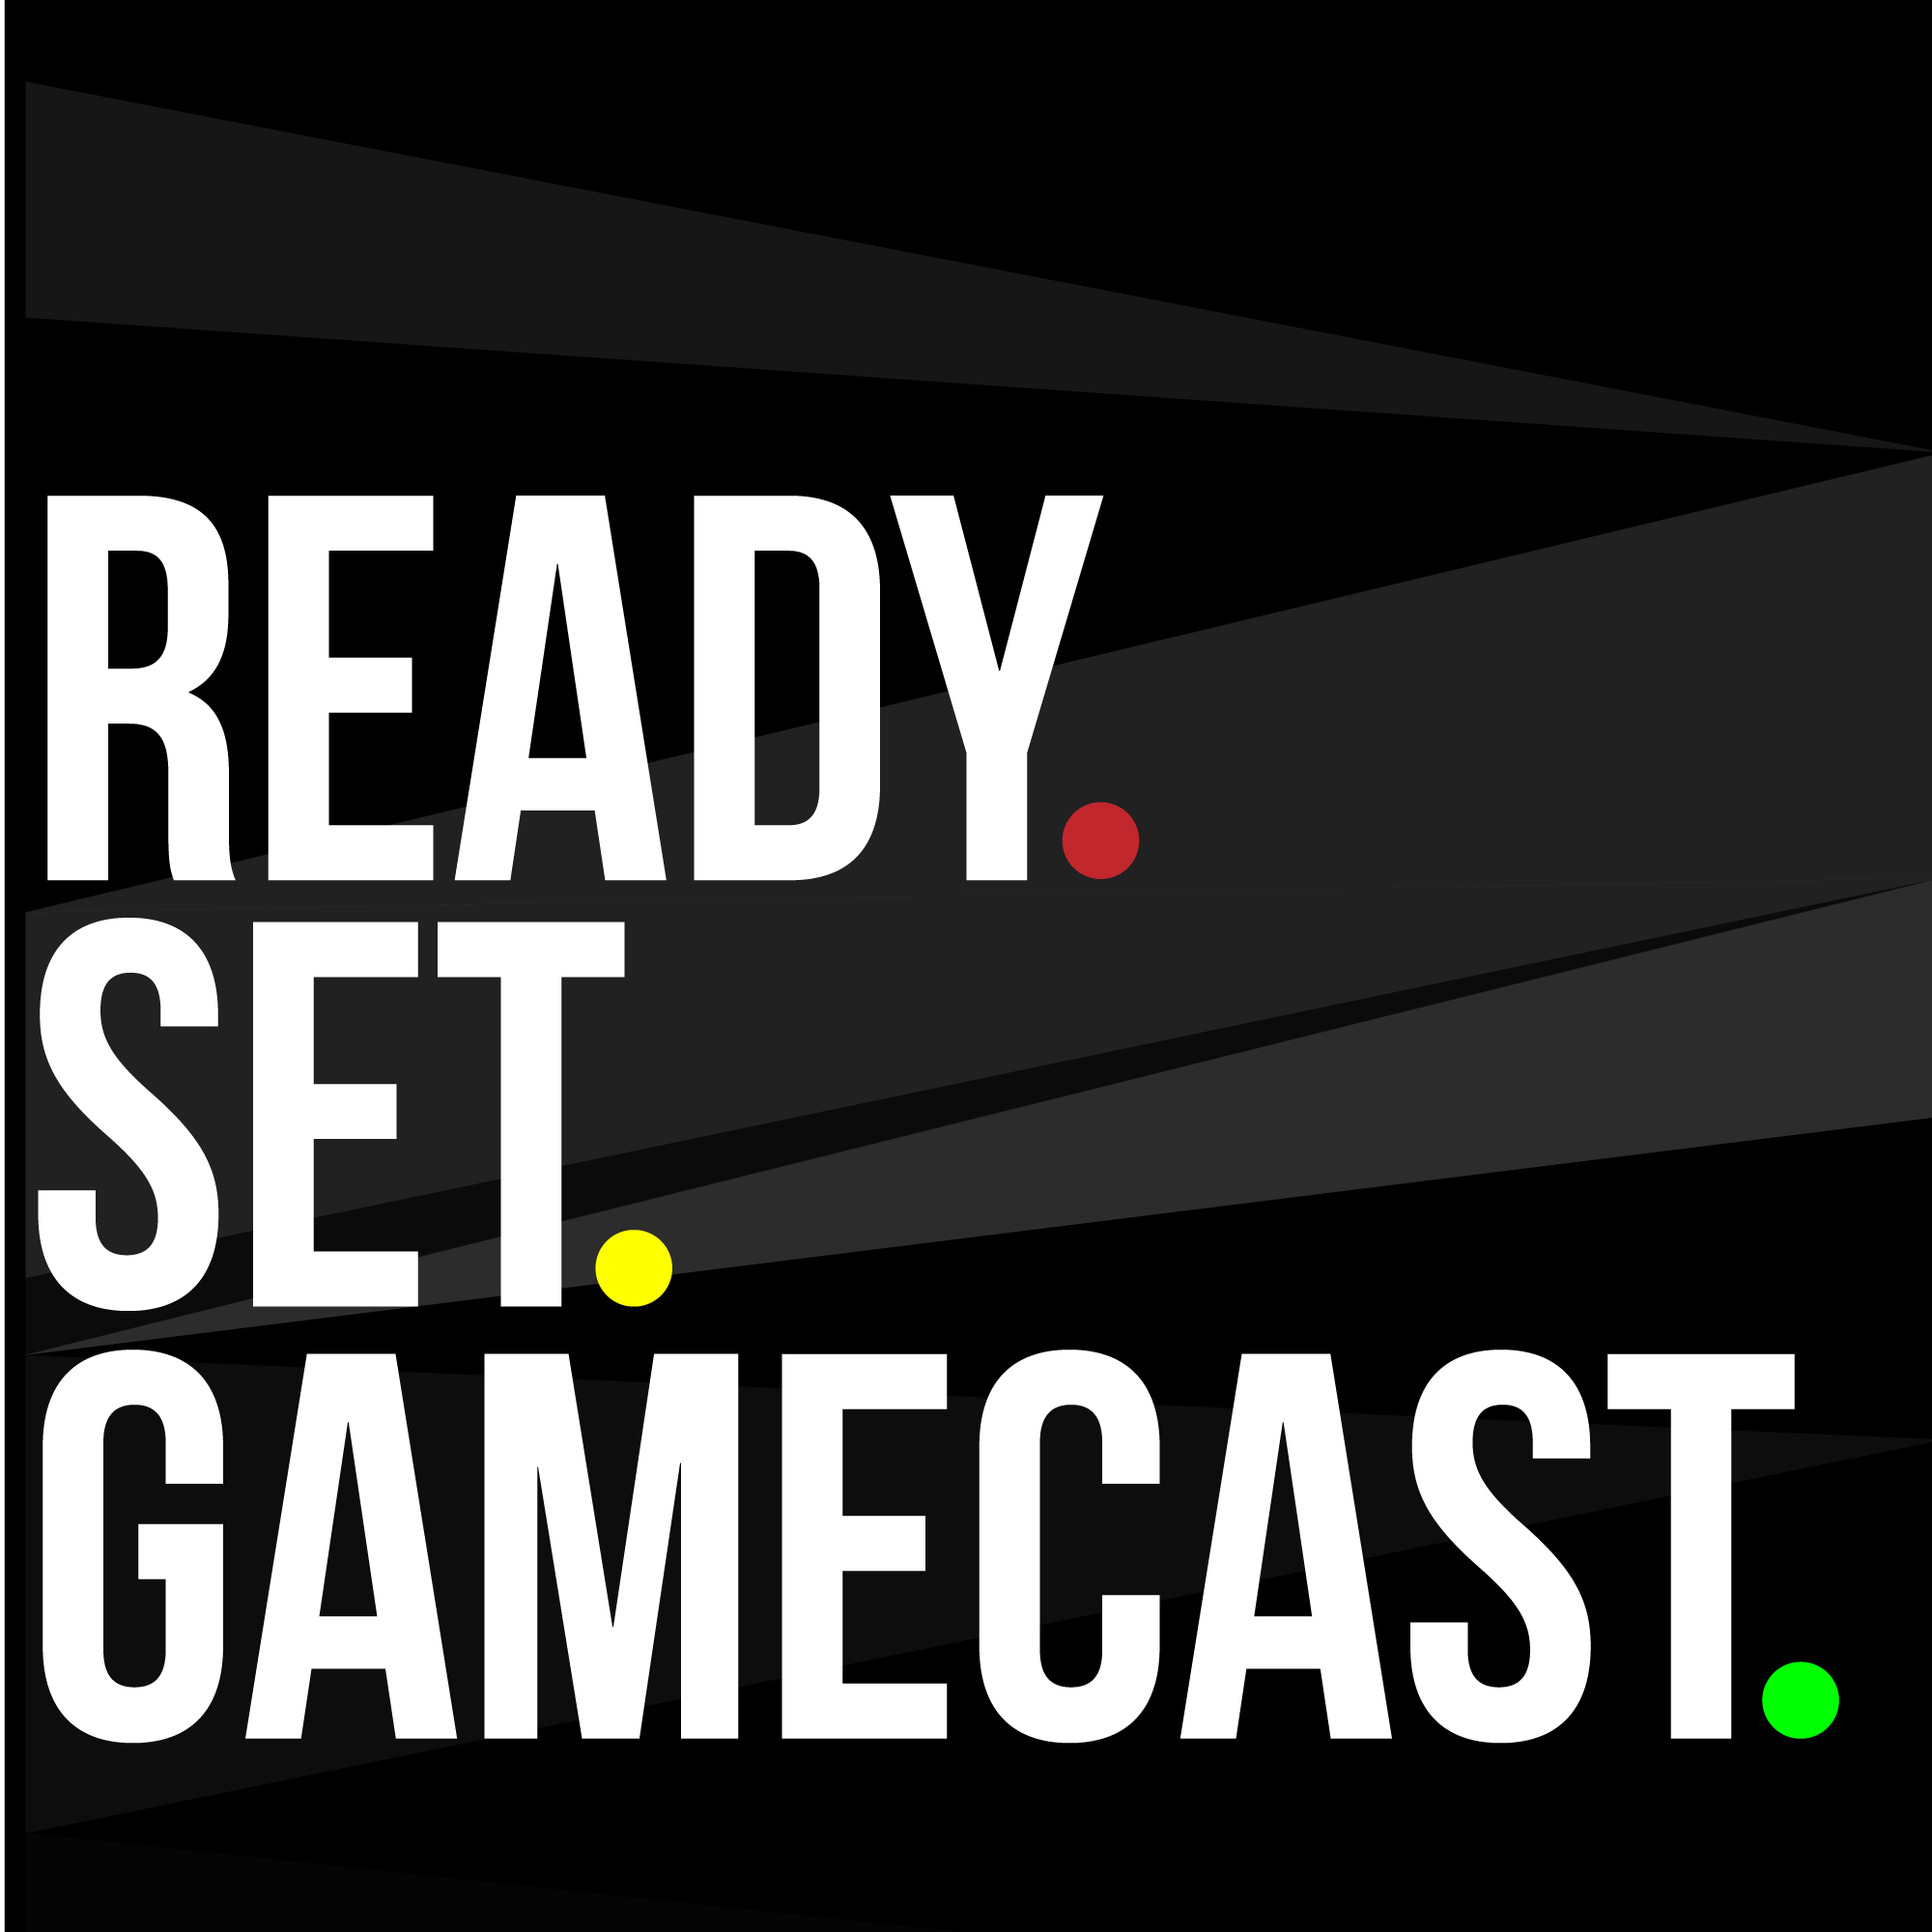 Ready Set Gamecast – Game of the Year 2017 – Ready Set Gamecast